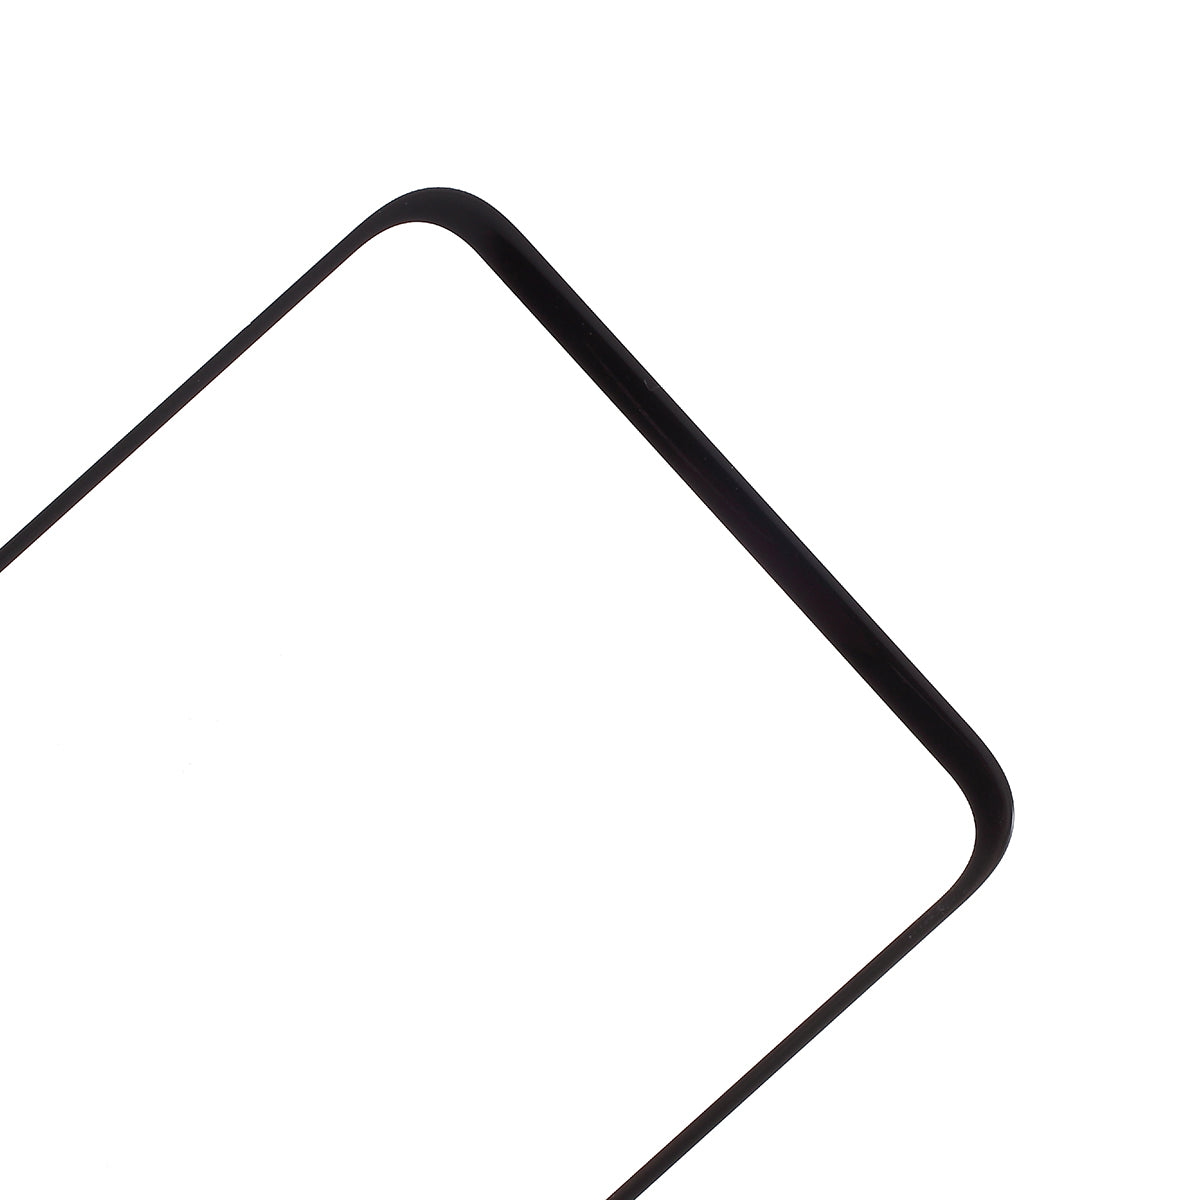 For Huawei Honor 20/nova 5T (without Logo) Front Screen Glass Lens with Frame Replacement Part - Black